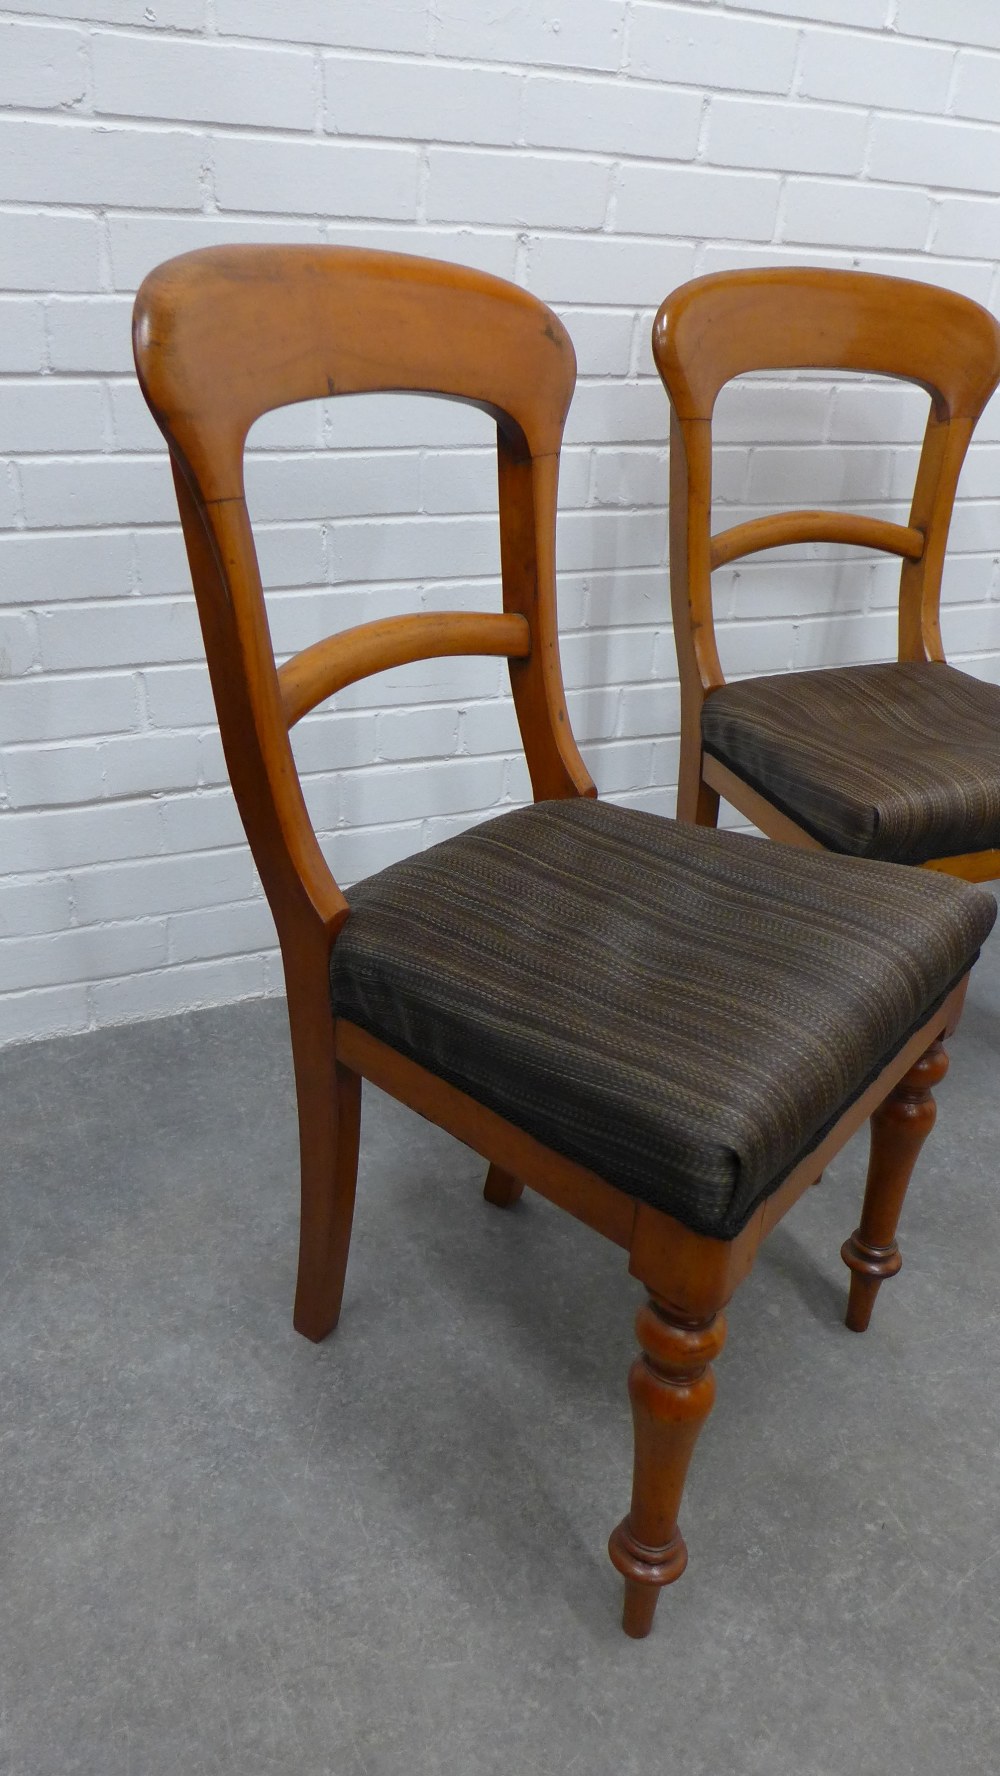 Set of three Victorian balloon back chairs with horsehair upholstered seats, 90 x 48 x 40cm. (3) - Image 2 of 3